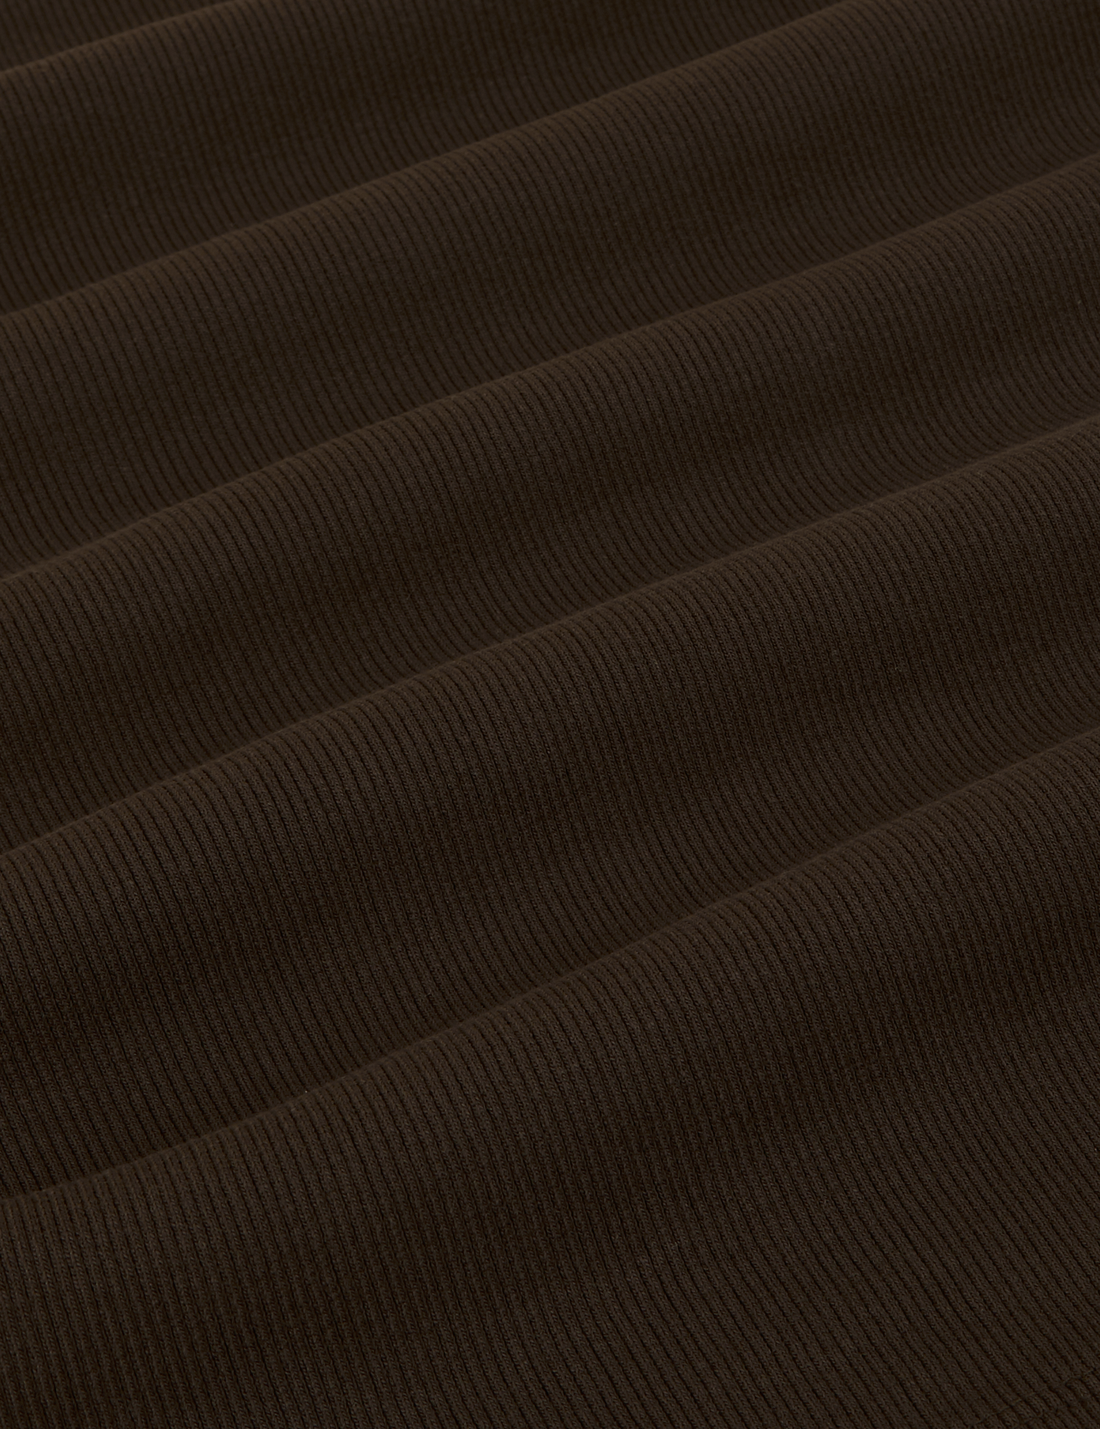 1/2 Sleeve Essential Turtleneck in Espresso Brown fabric detail close up